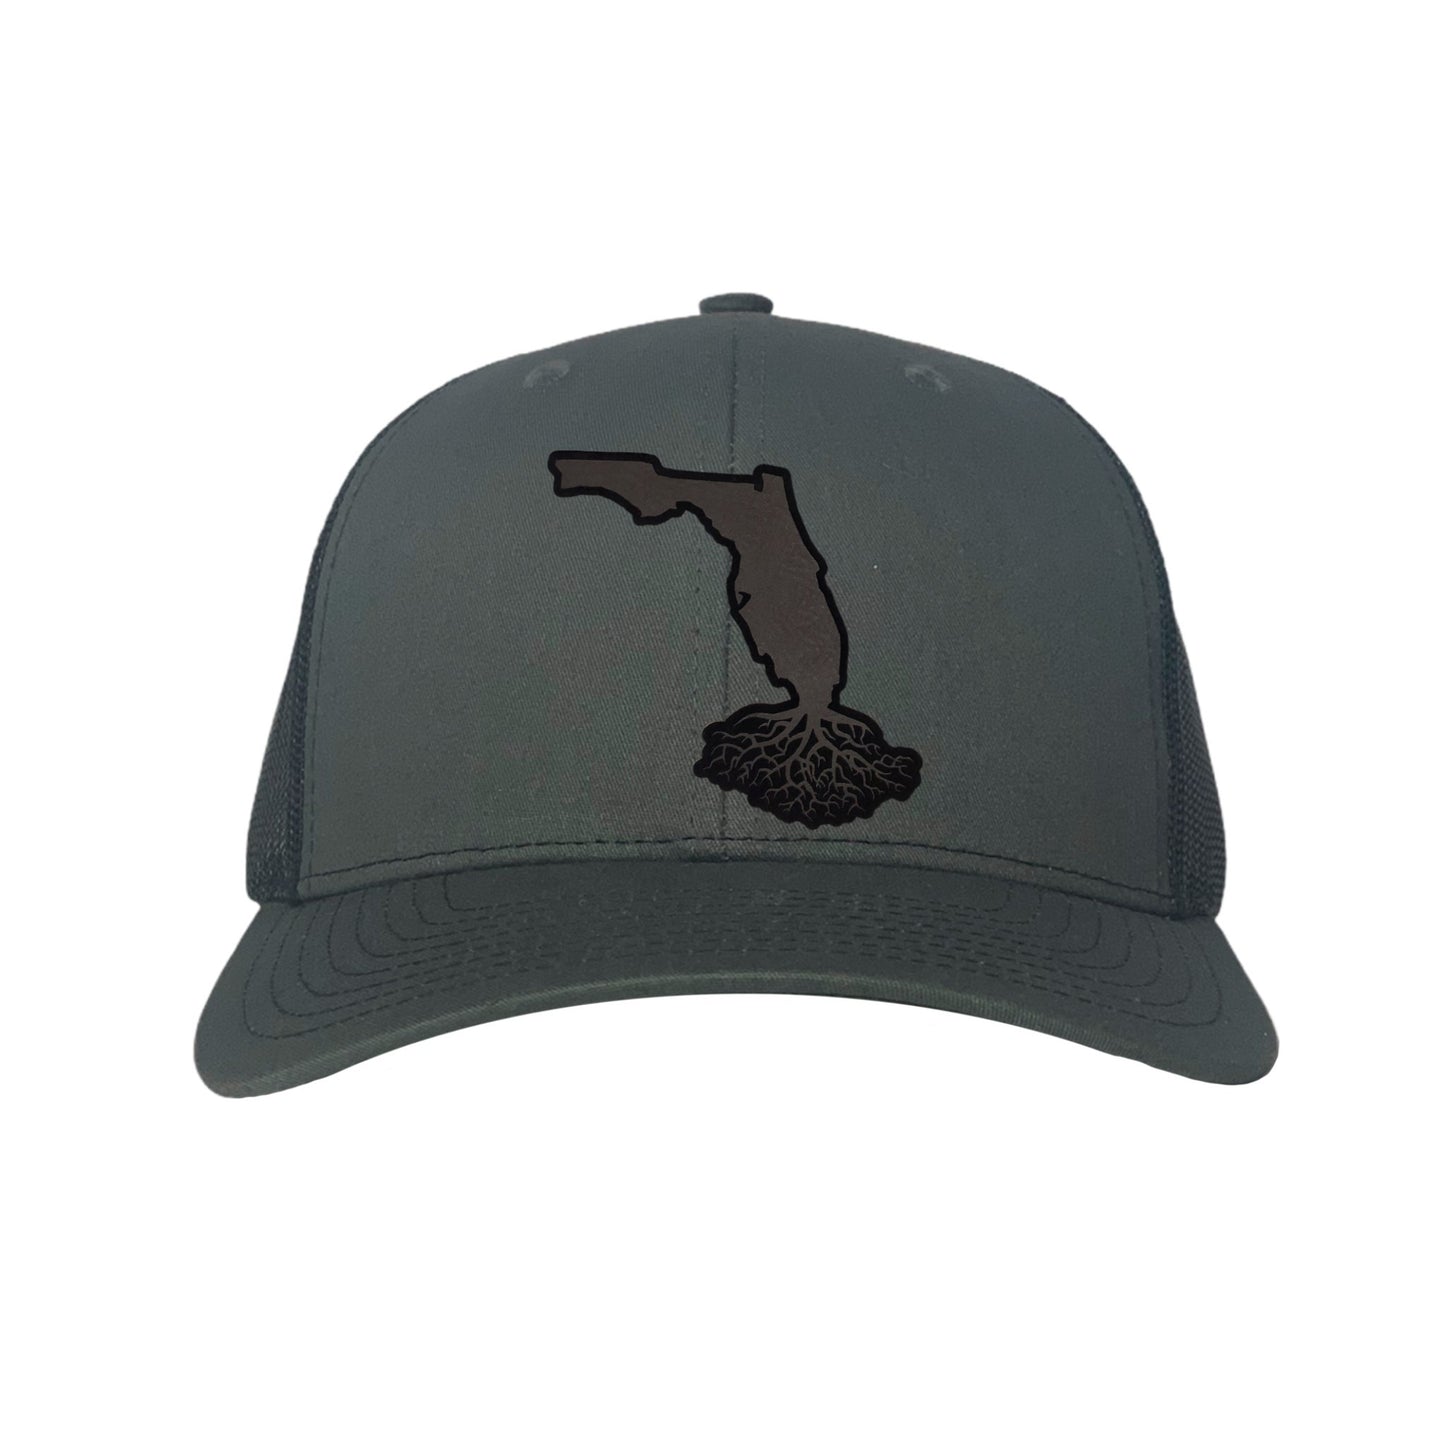 Florida Roots Patch Trucker Hat - Hats